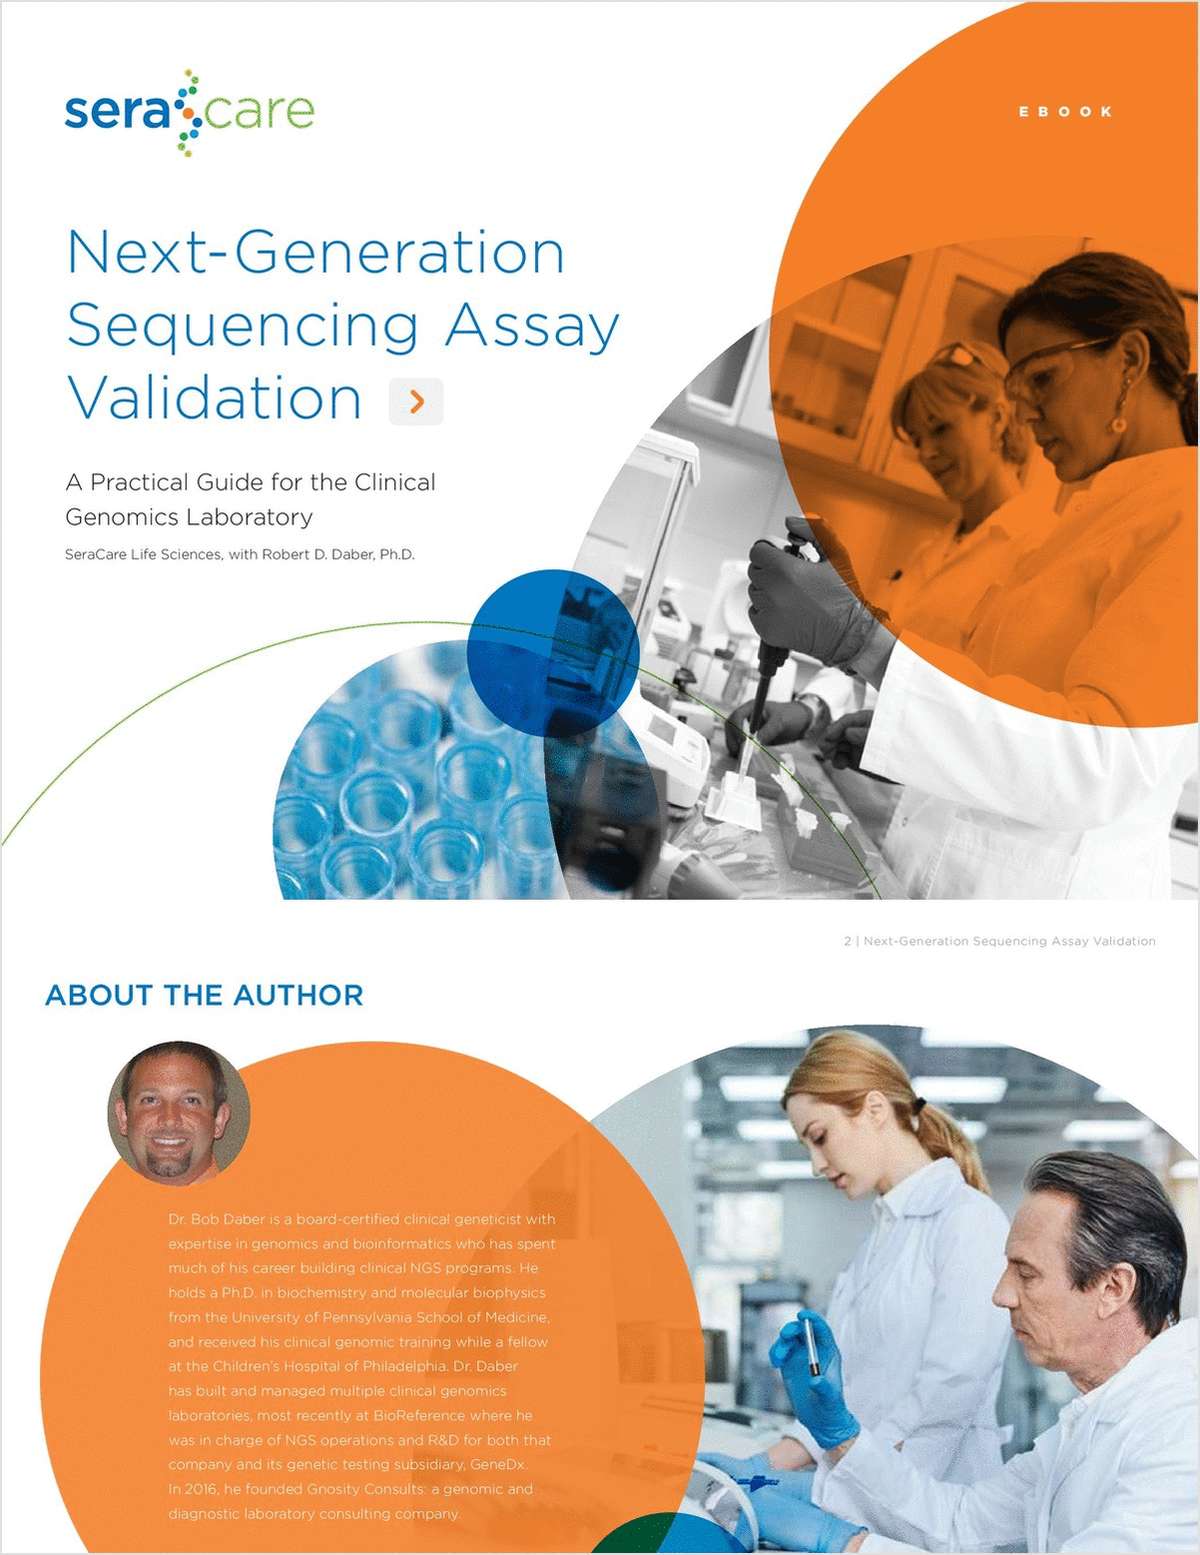 Next-Generation Sequencing Assay Validation A Practical Guide for the Clinical Genomics Laboratory (updated eBook)